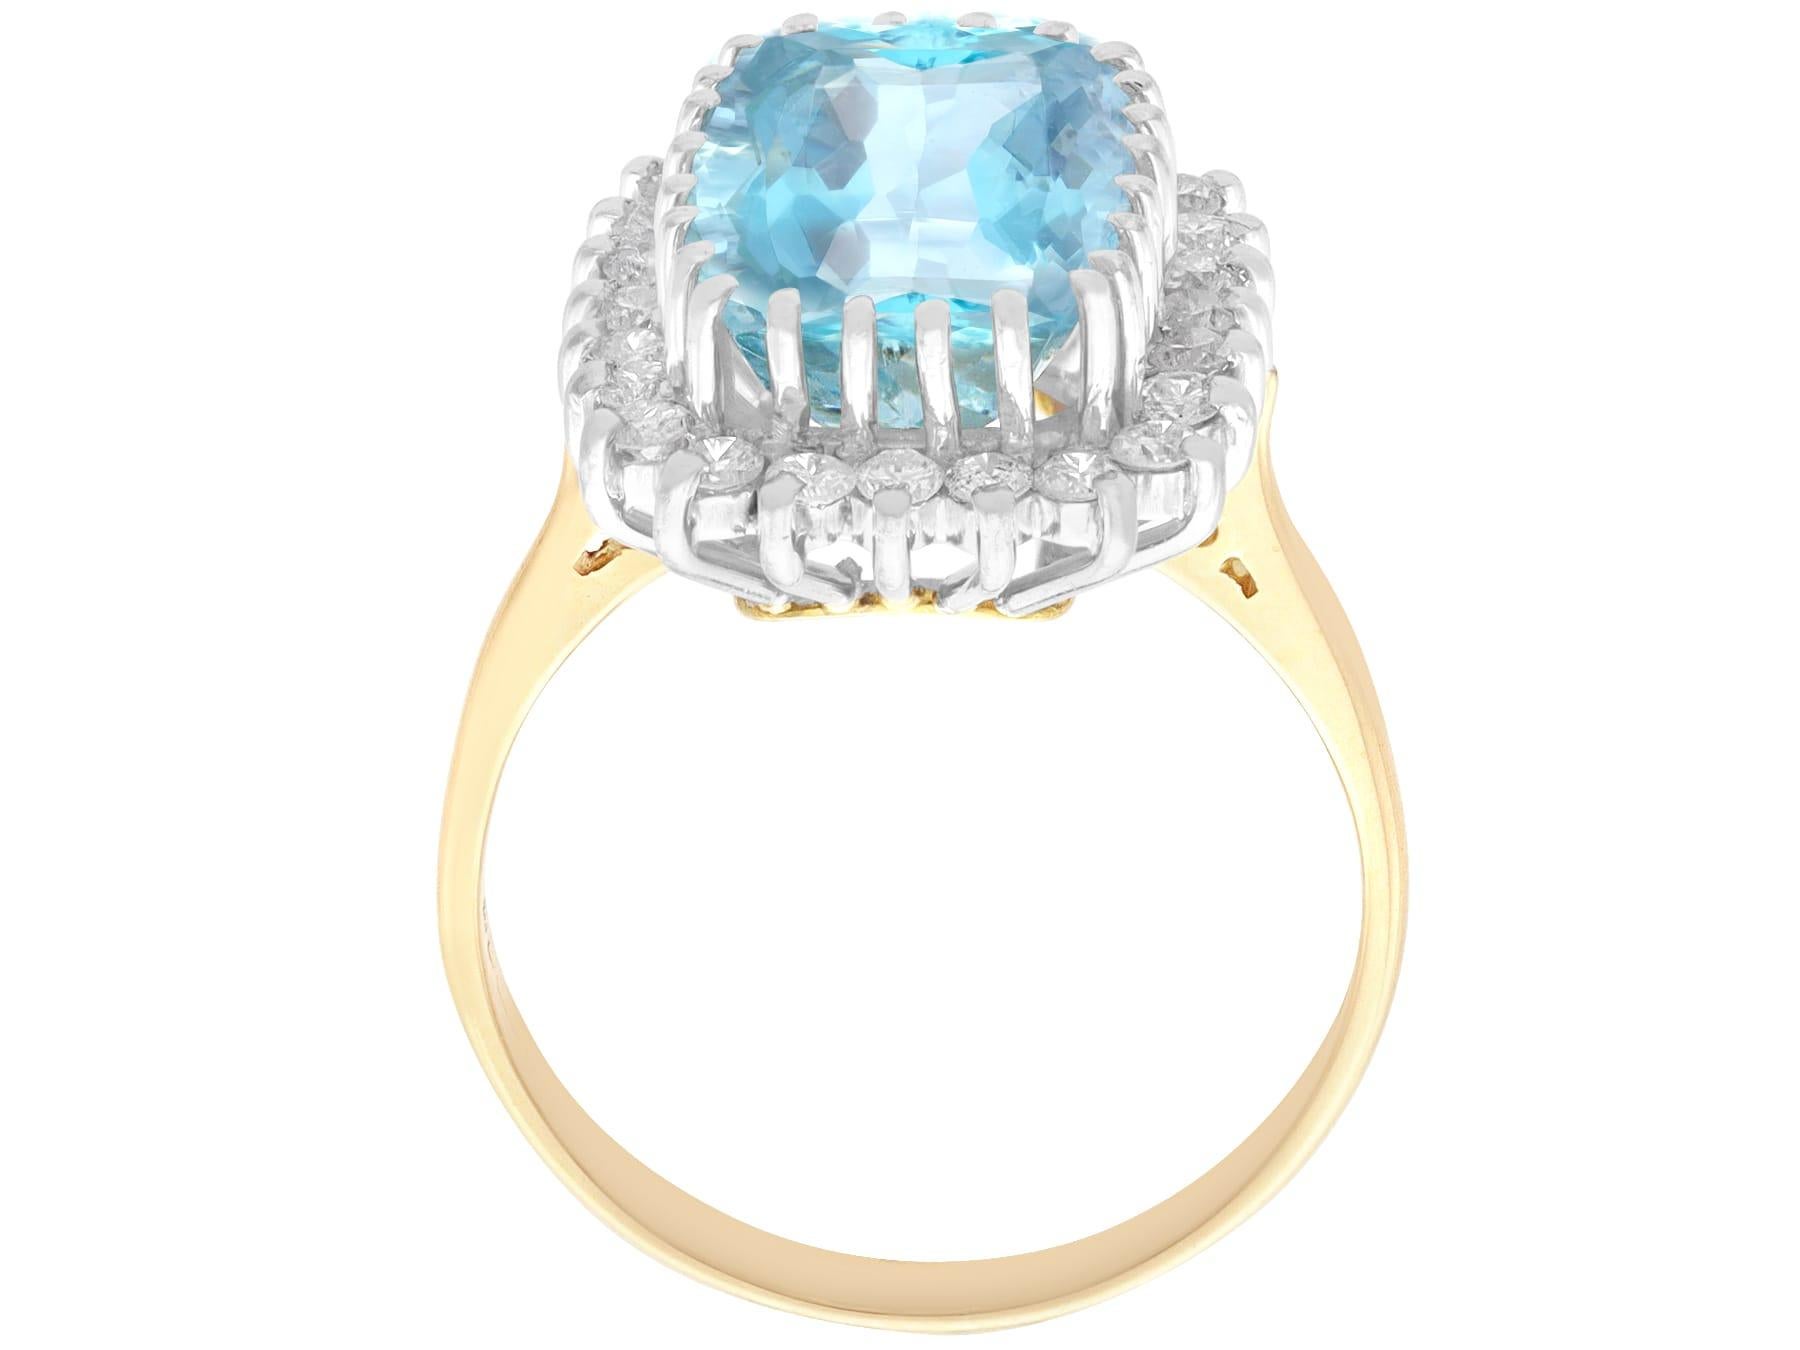 Vintage 4.56ct Aquamarine and Diamond Yellow Gold Cocktail Ring In Excellent Condition For Sale In Jesmond, Newcastle Upon Tyne